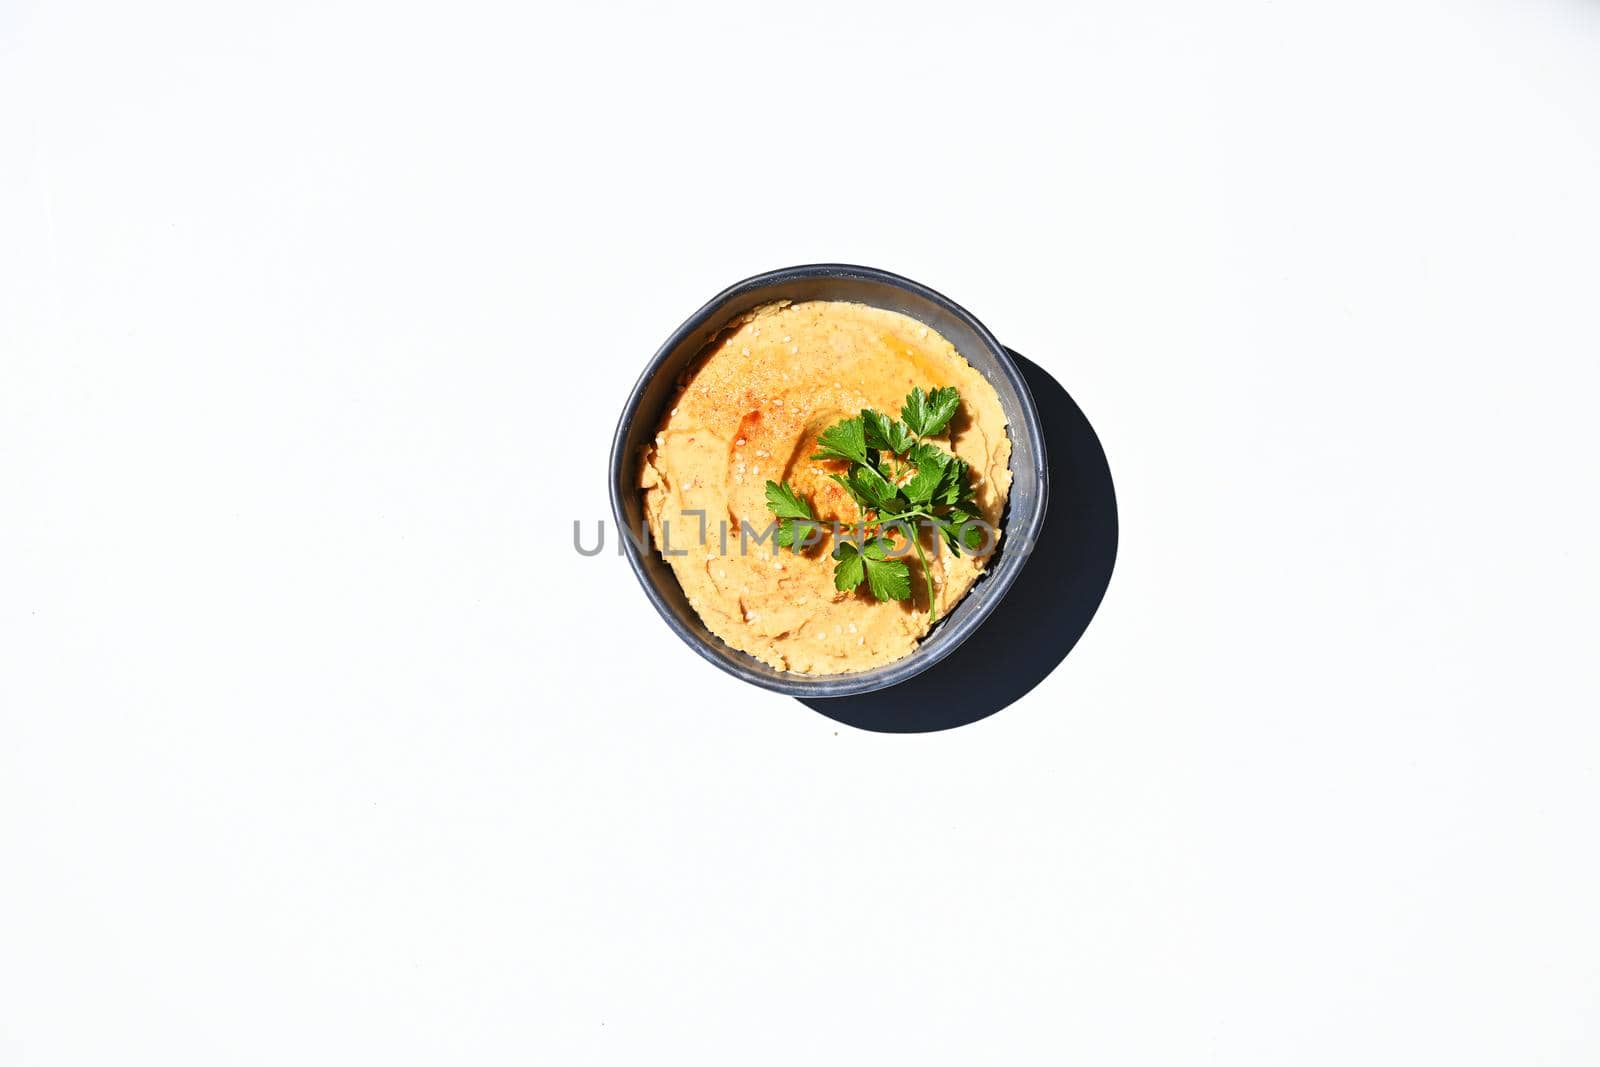 Still life. Flat lay composition of a blue ceramic bowl of hummus sprinkled with paprika, parsley and olive oil, isolated over white background with copy space for advertising text